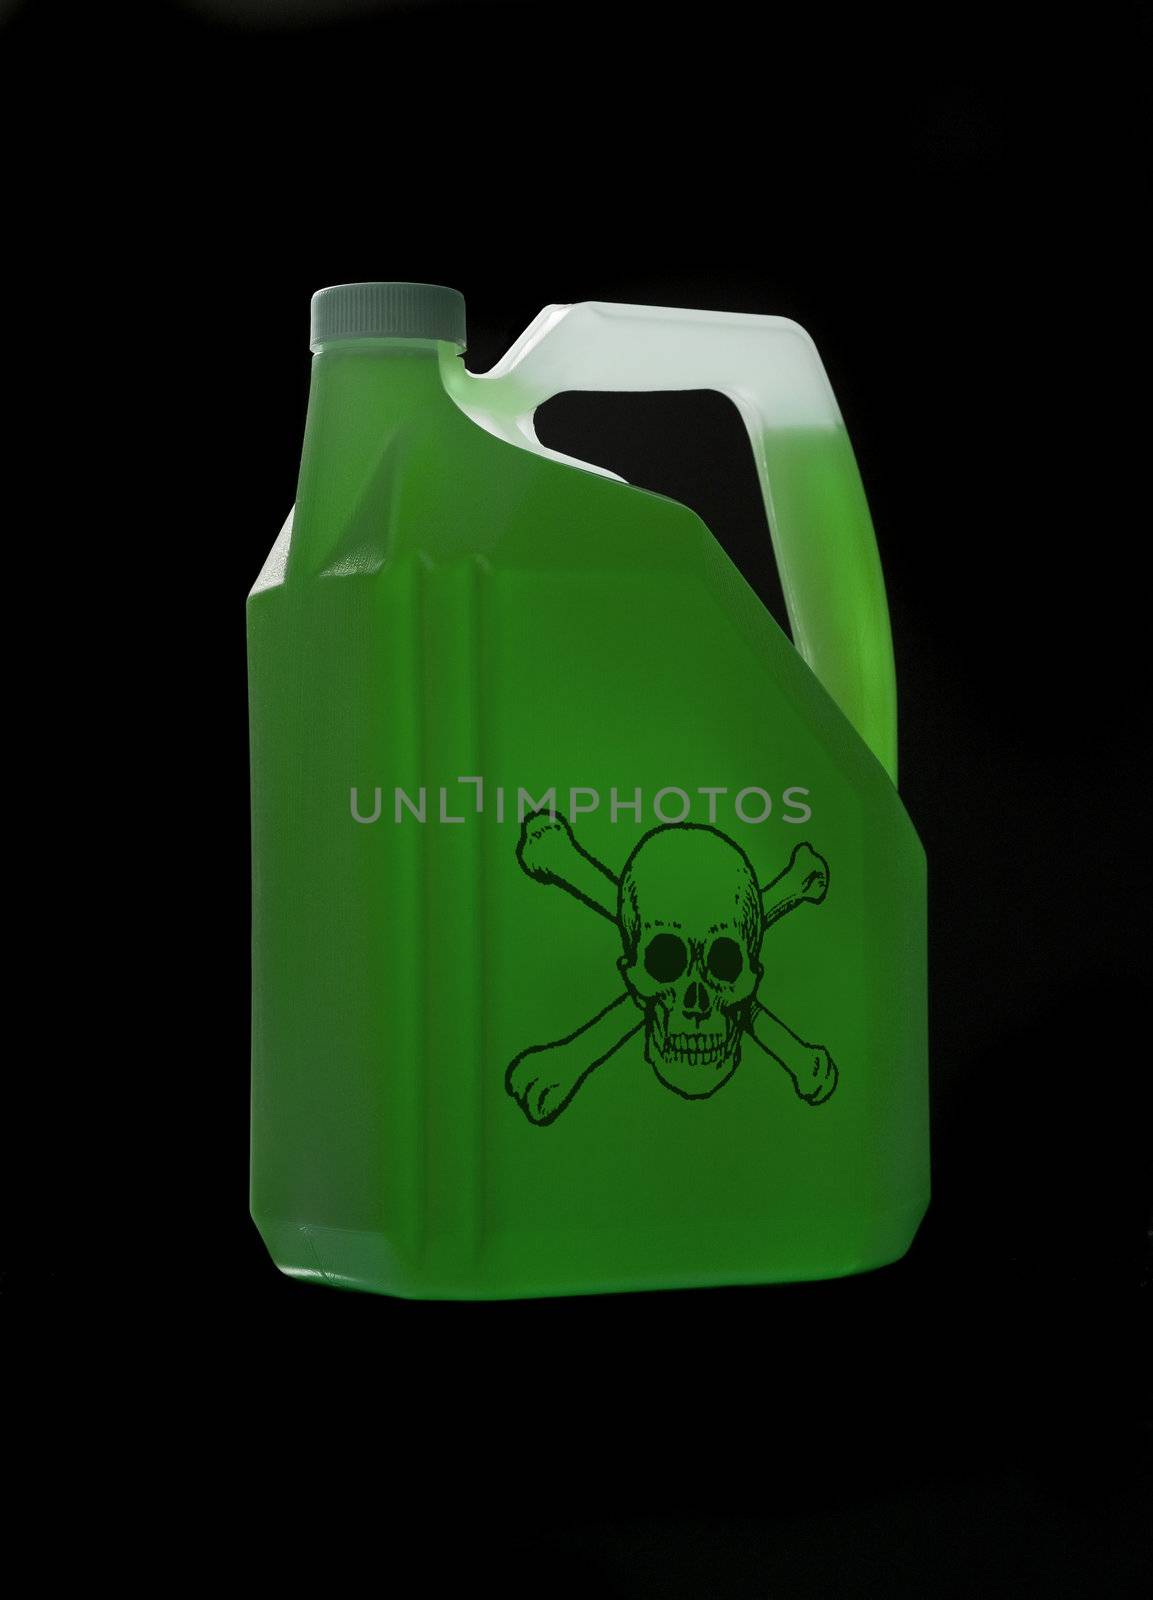 Can with biohazard content by gemenacom